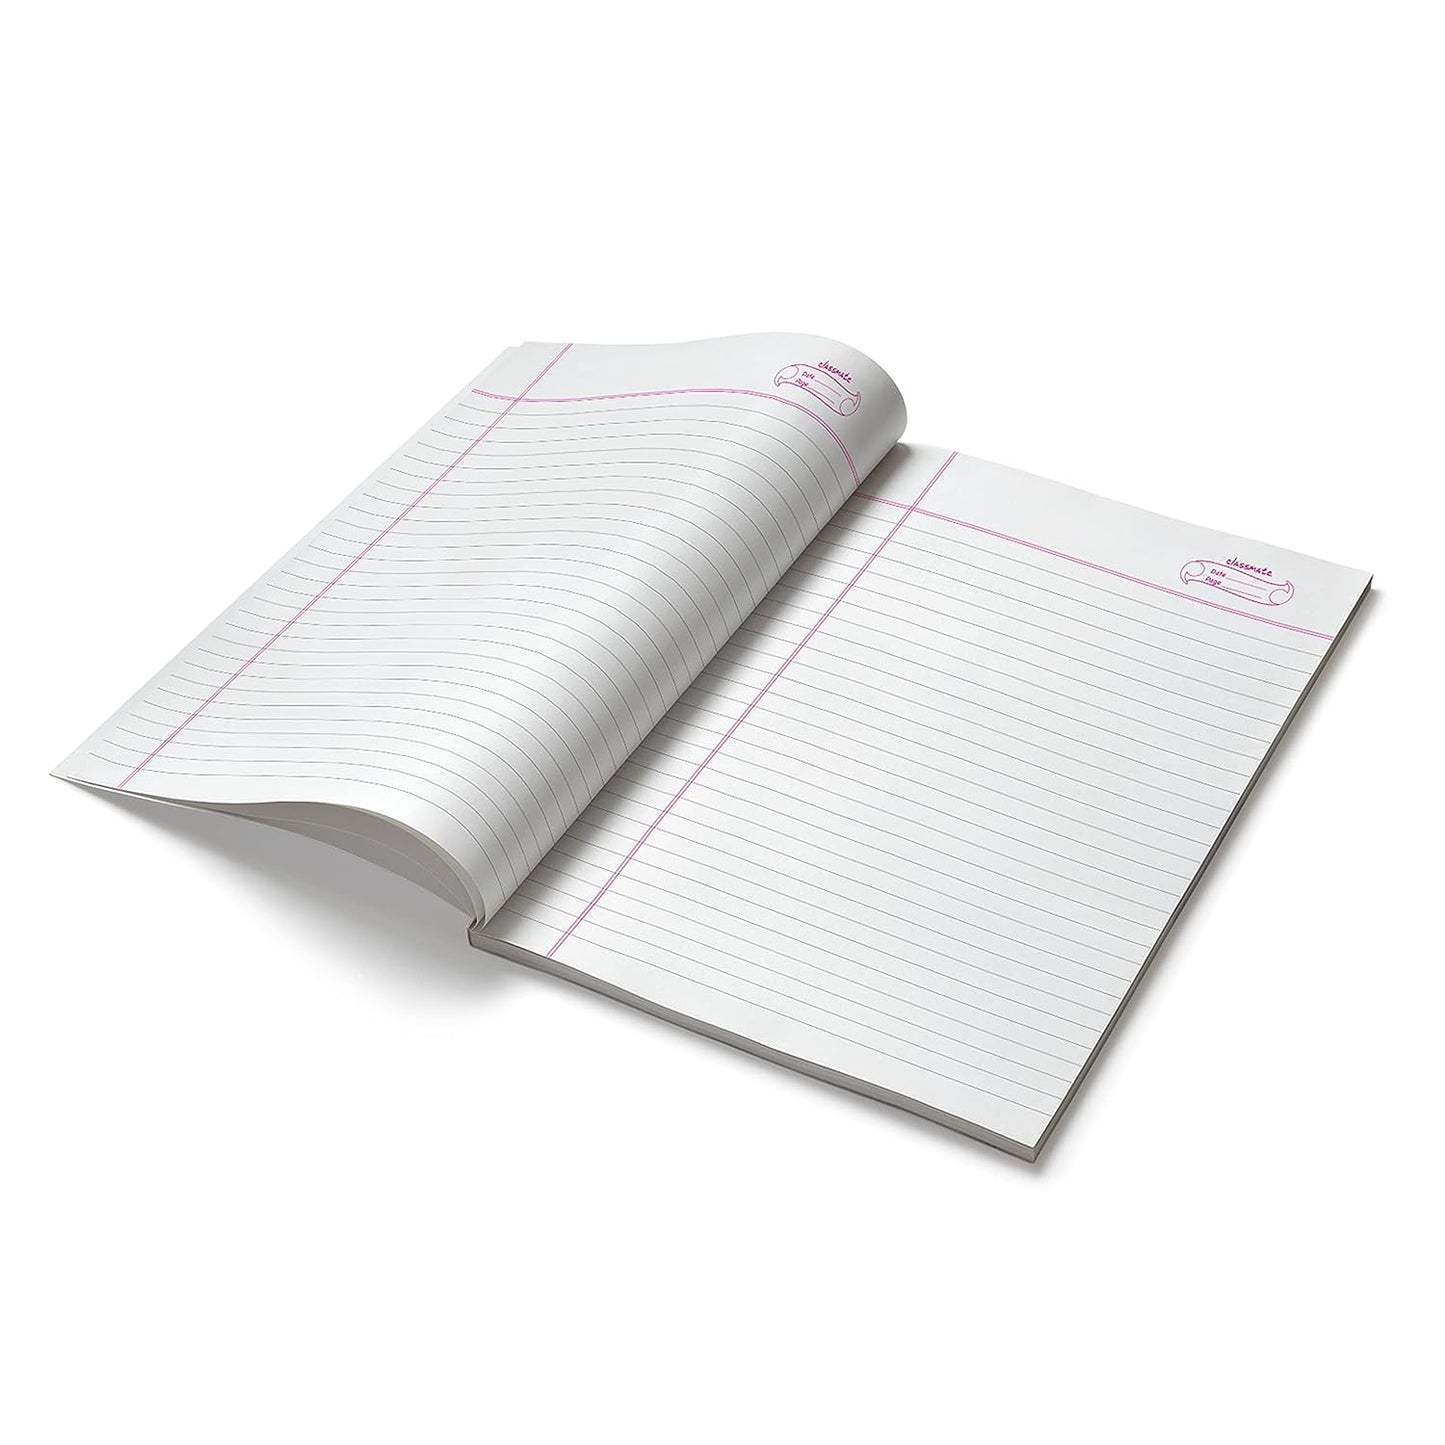 Classmate Hindi | Maths | English Notebook 120 Pages Single Lines Lines Ruled (24 x 18 cm) Regular Size